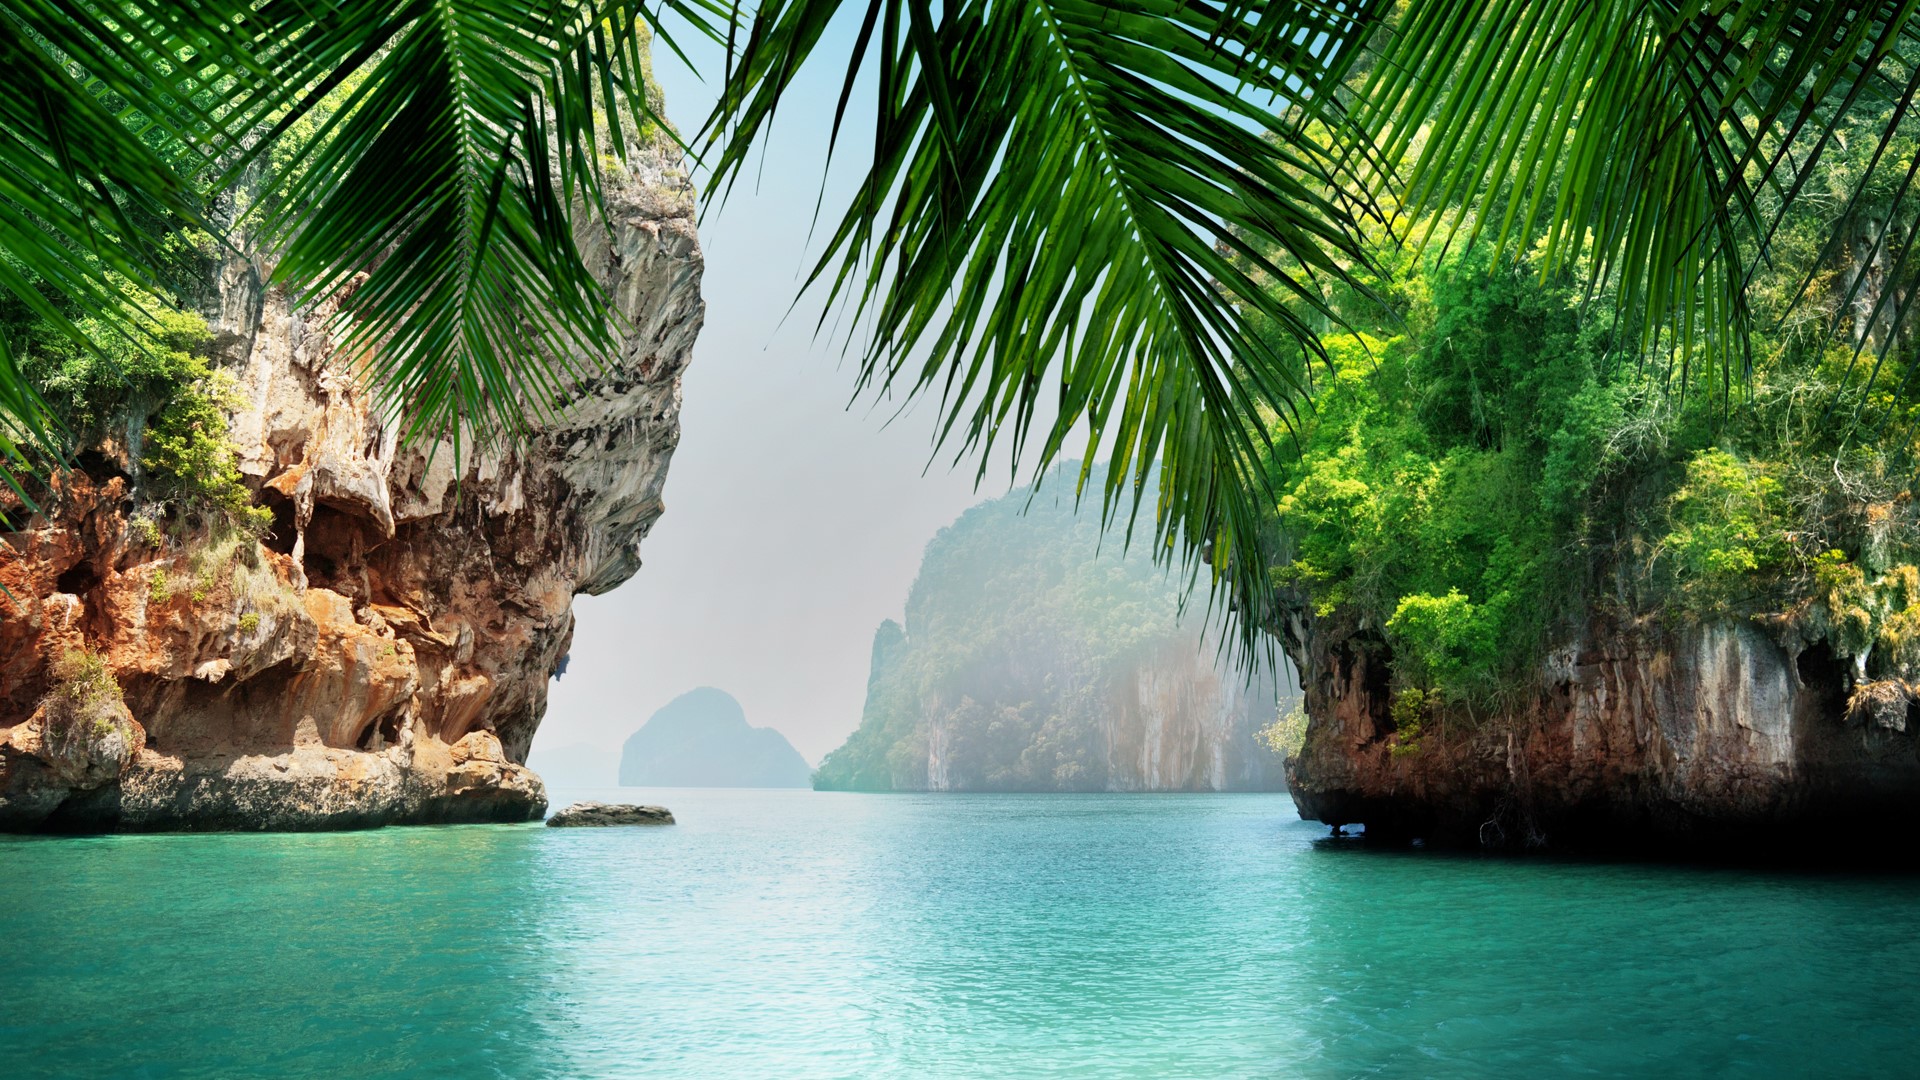 Nature Landscape Rocks Mountains Water Trees Leaves Tropical Forest Sky Clear Water Thailand 1920x1080